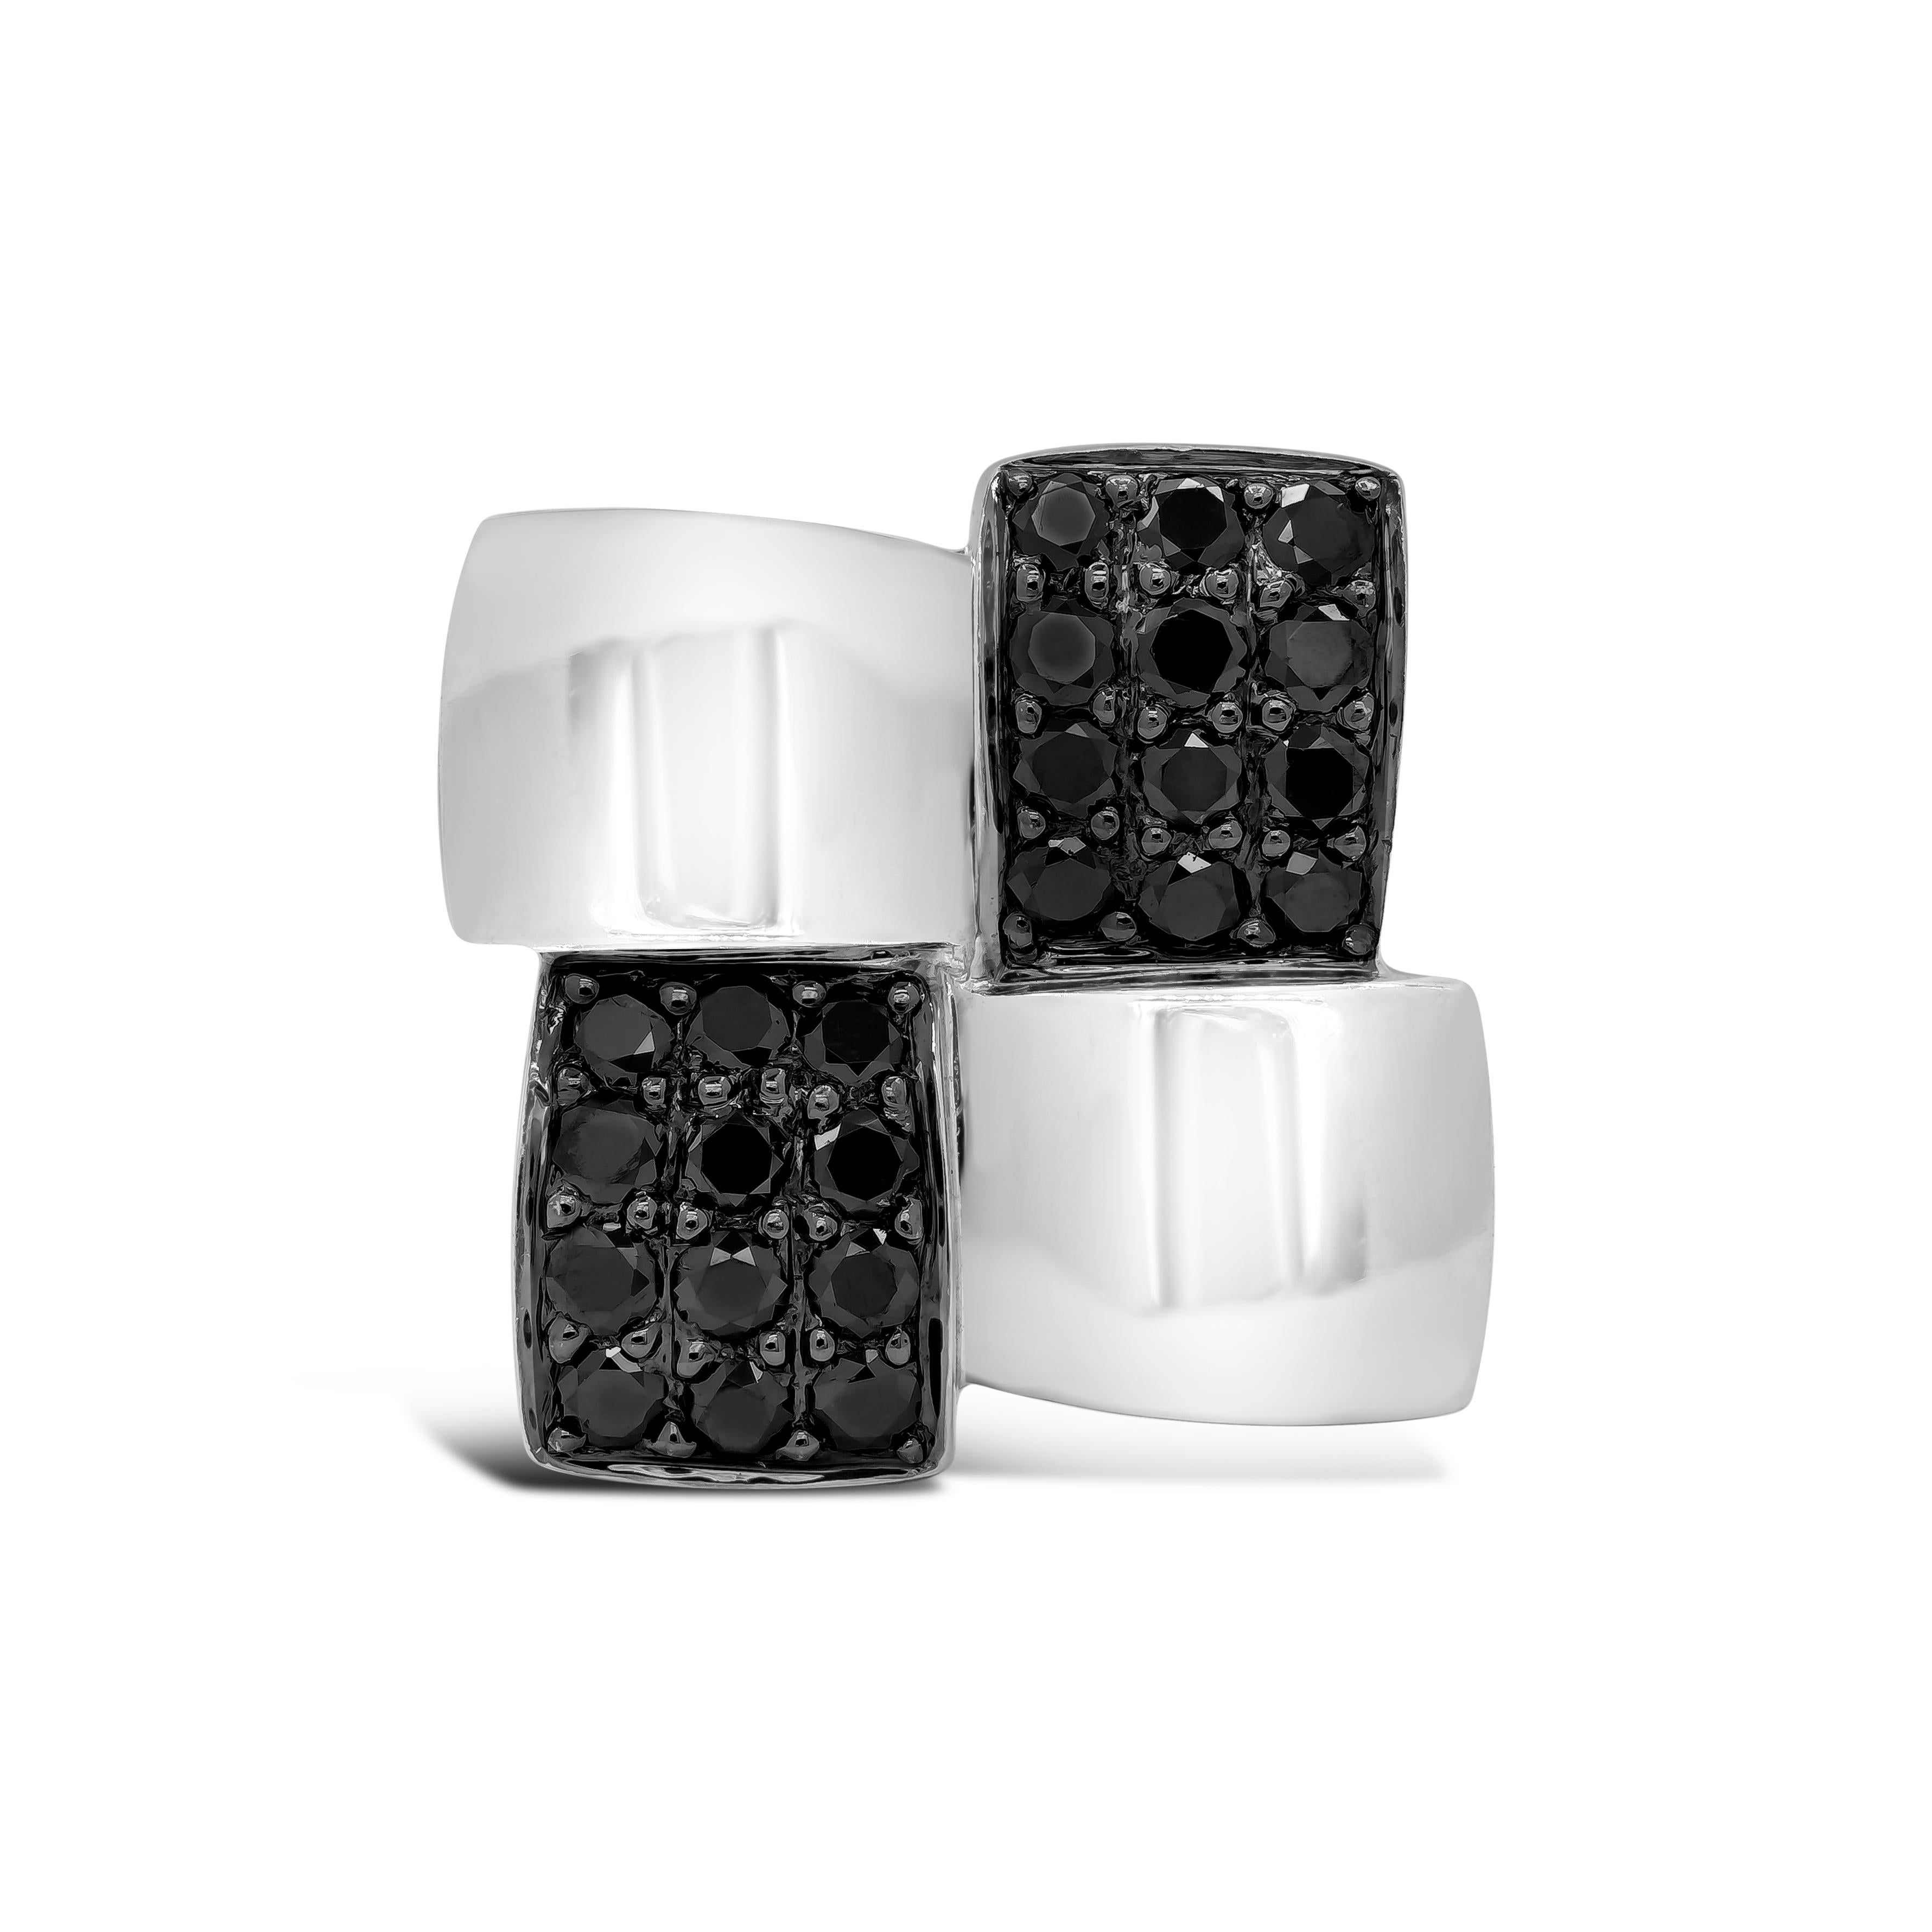 Whale back cufflinks showcasing a square face encrusted with black diamonds. Black diamonds weigh 0.72 carats total. Made in 14 karat white gold.

